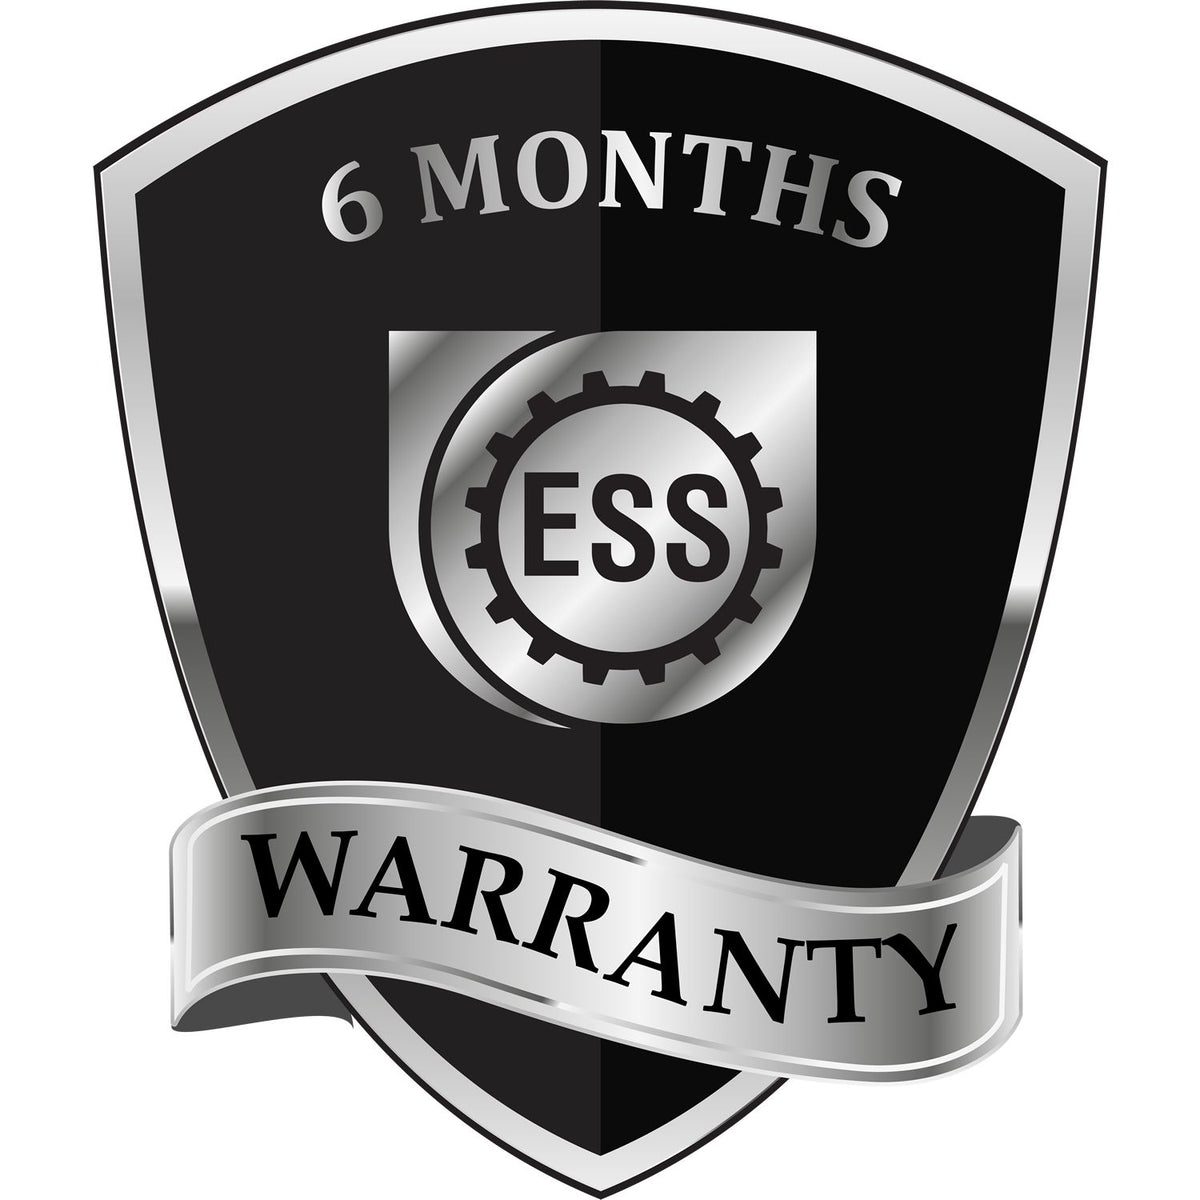 A black and silver badge or emblem showing warranty information for the Montana Professional Geologist Seal Stamp